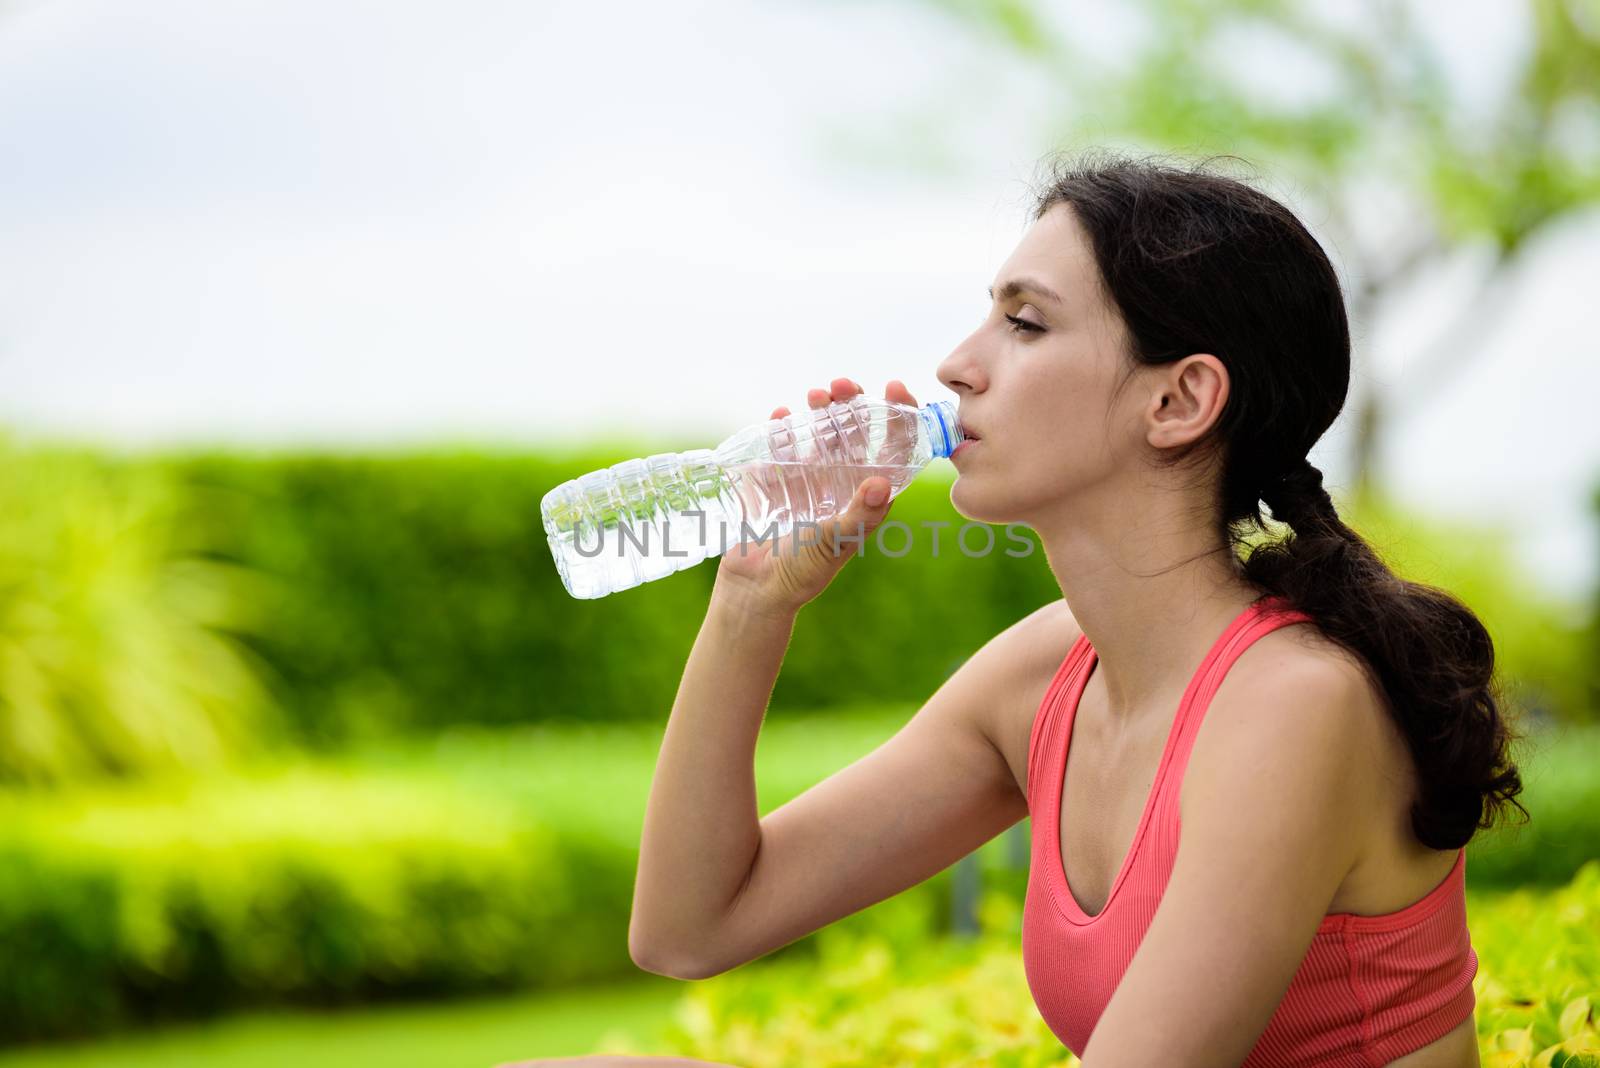 Beautiful woman runner has tired and rest for drinking water after running in the garden.